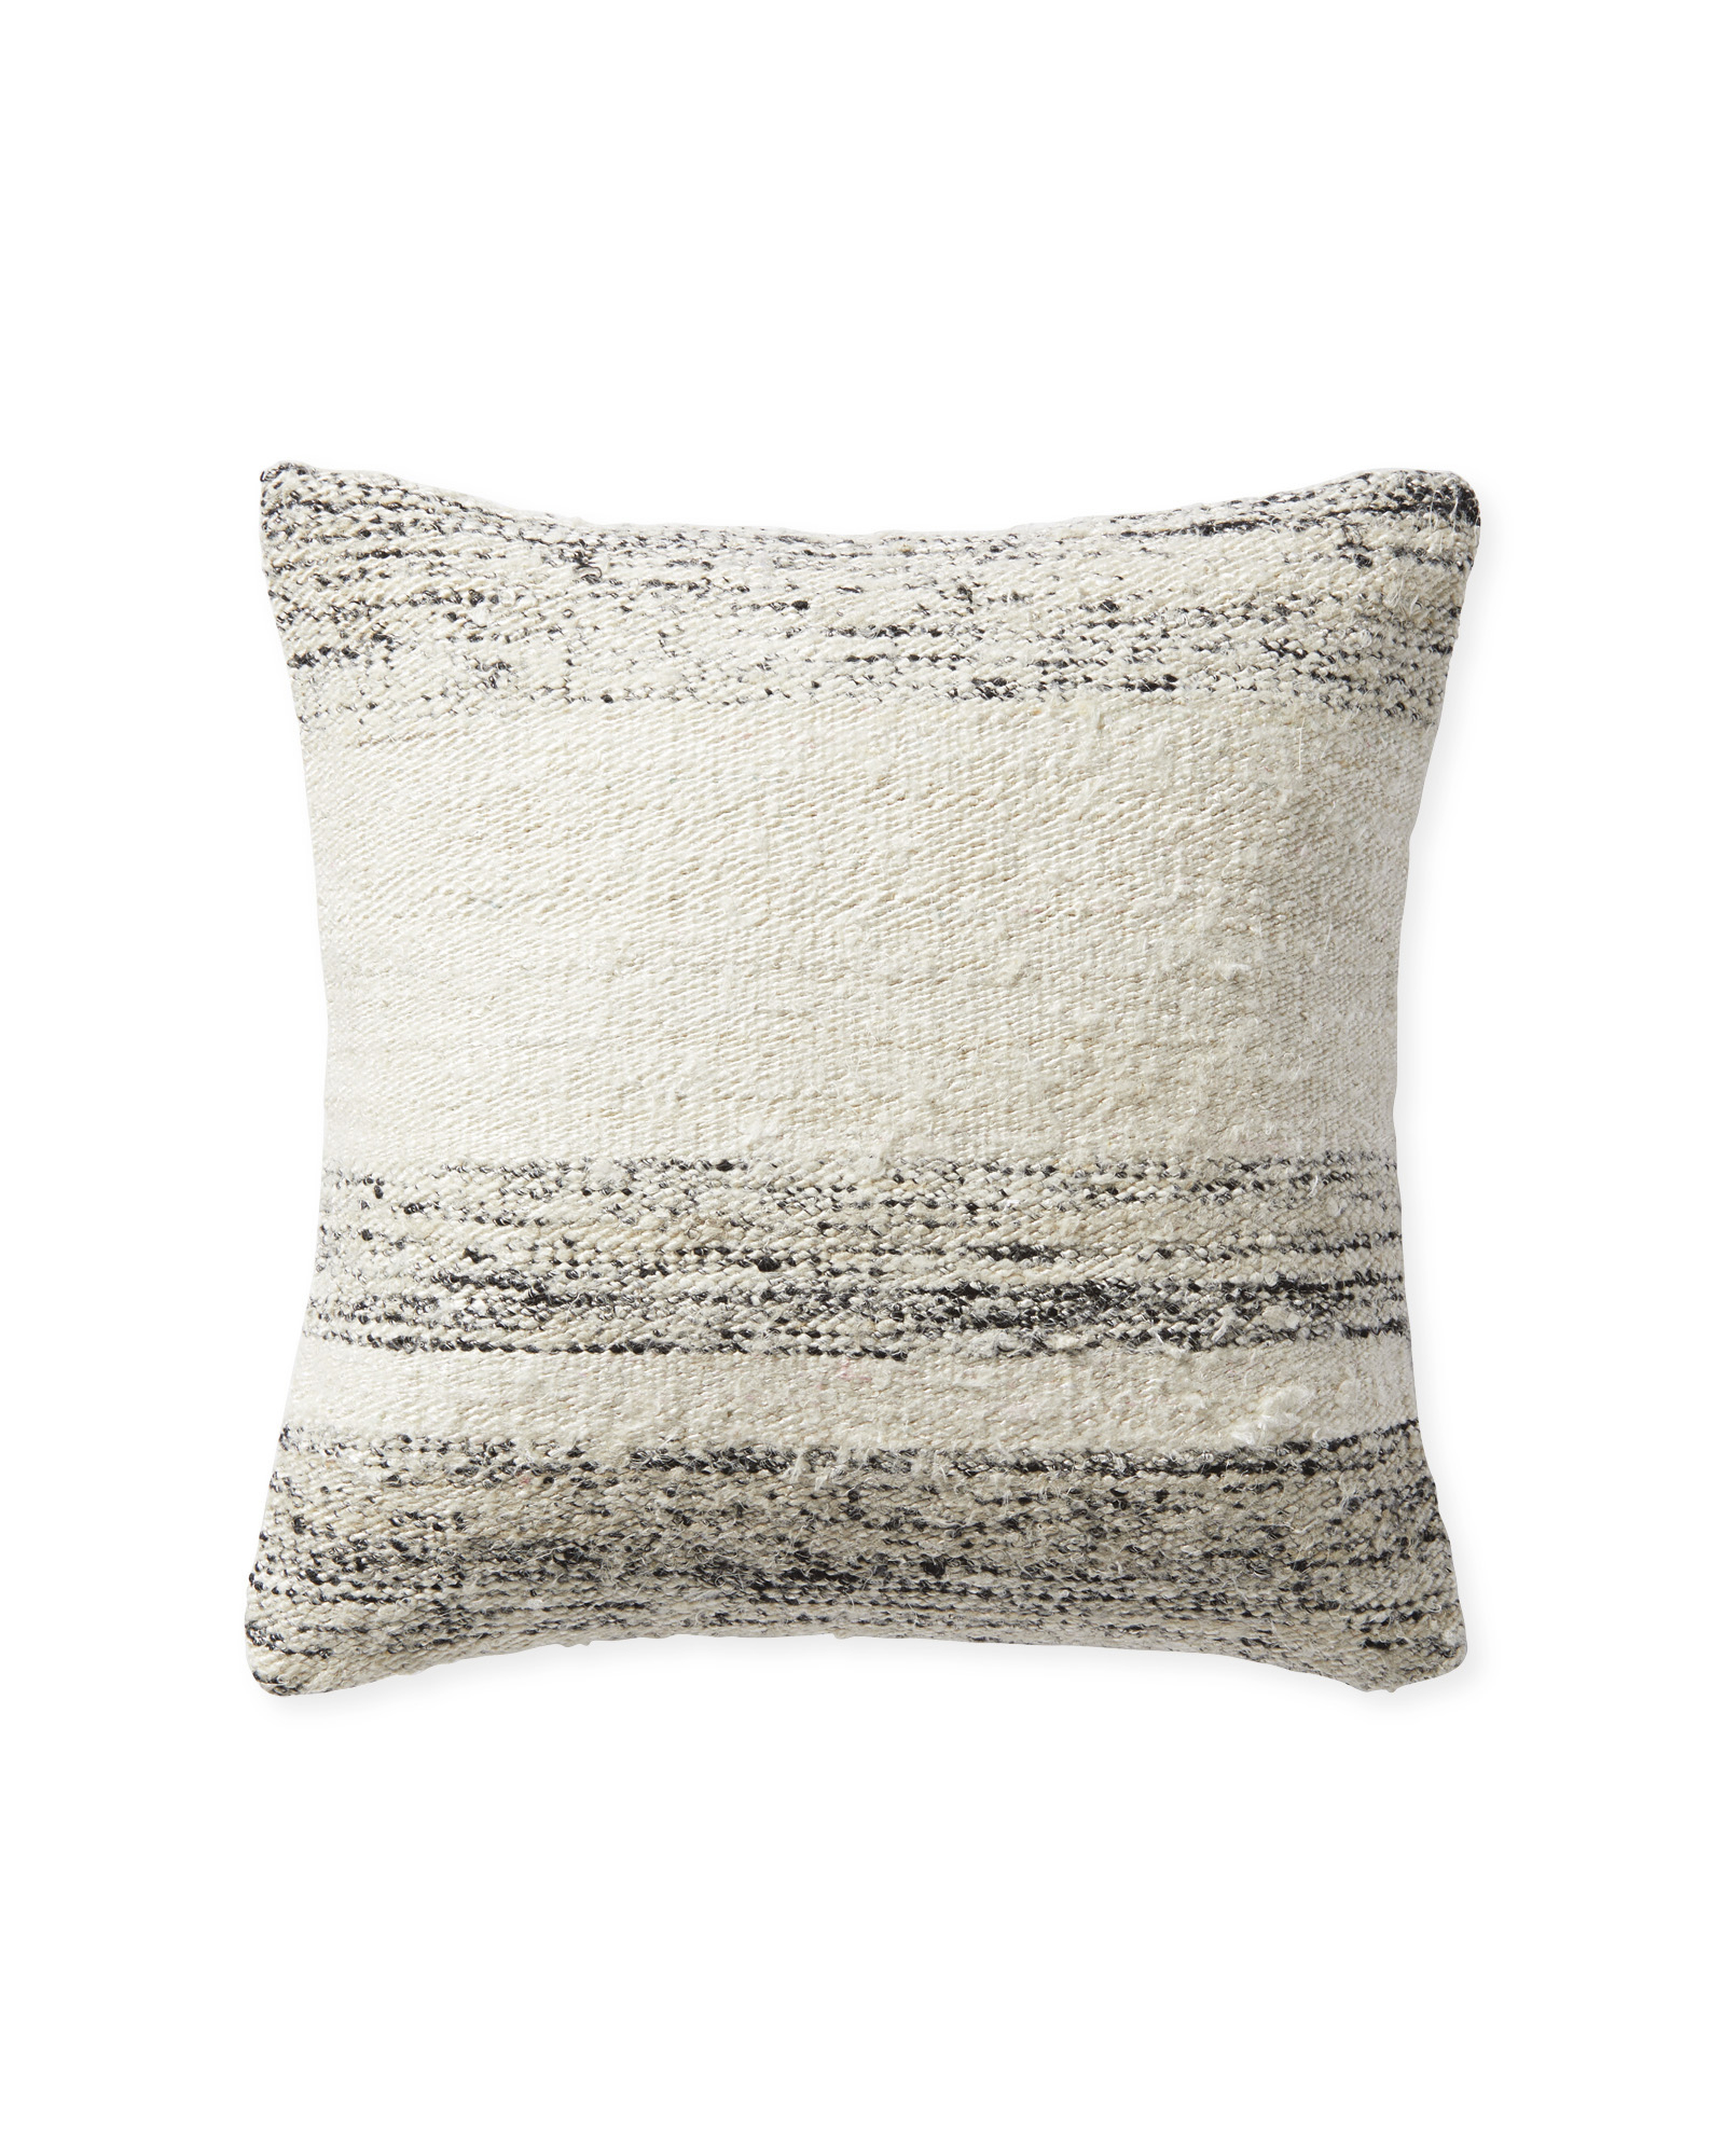 Keys Stripe Pillow Cover - Serena and Lily